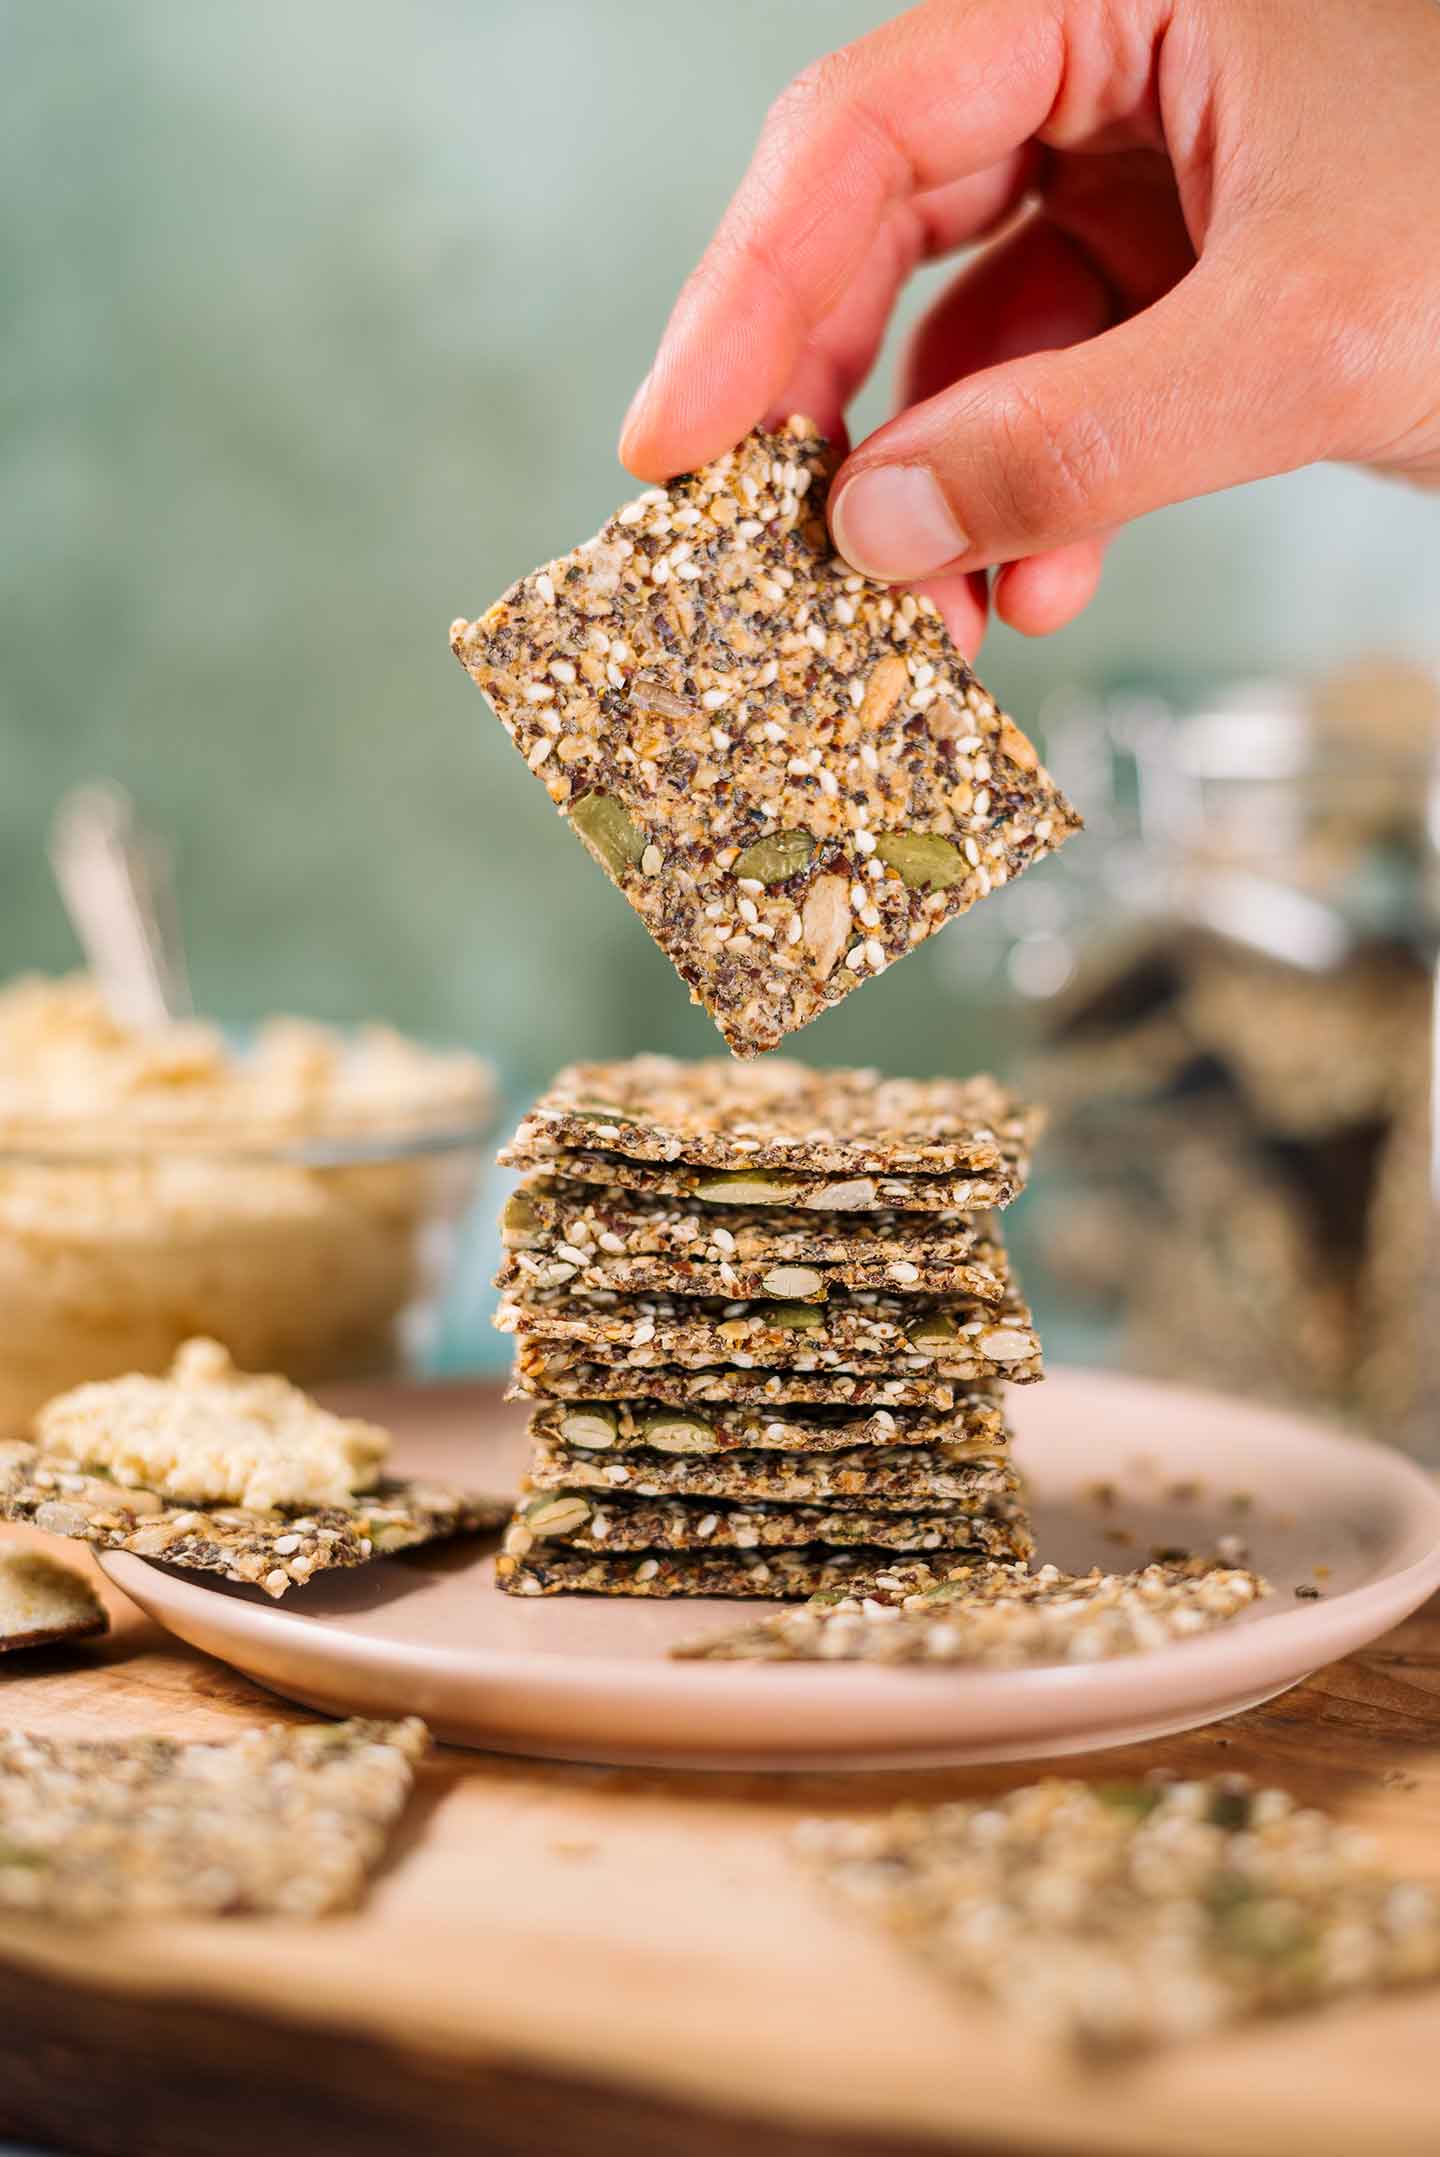 A hand holds a gluten-free seed cracker up from a stack of thin and crispy crackers made entirely from a combination of seeds. A jar of crackers and a bowl of hummus are in the background.